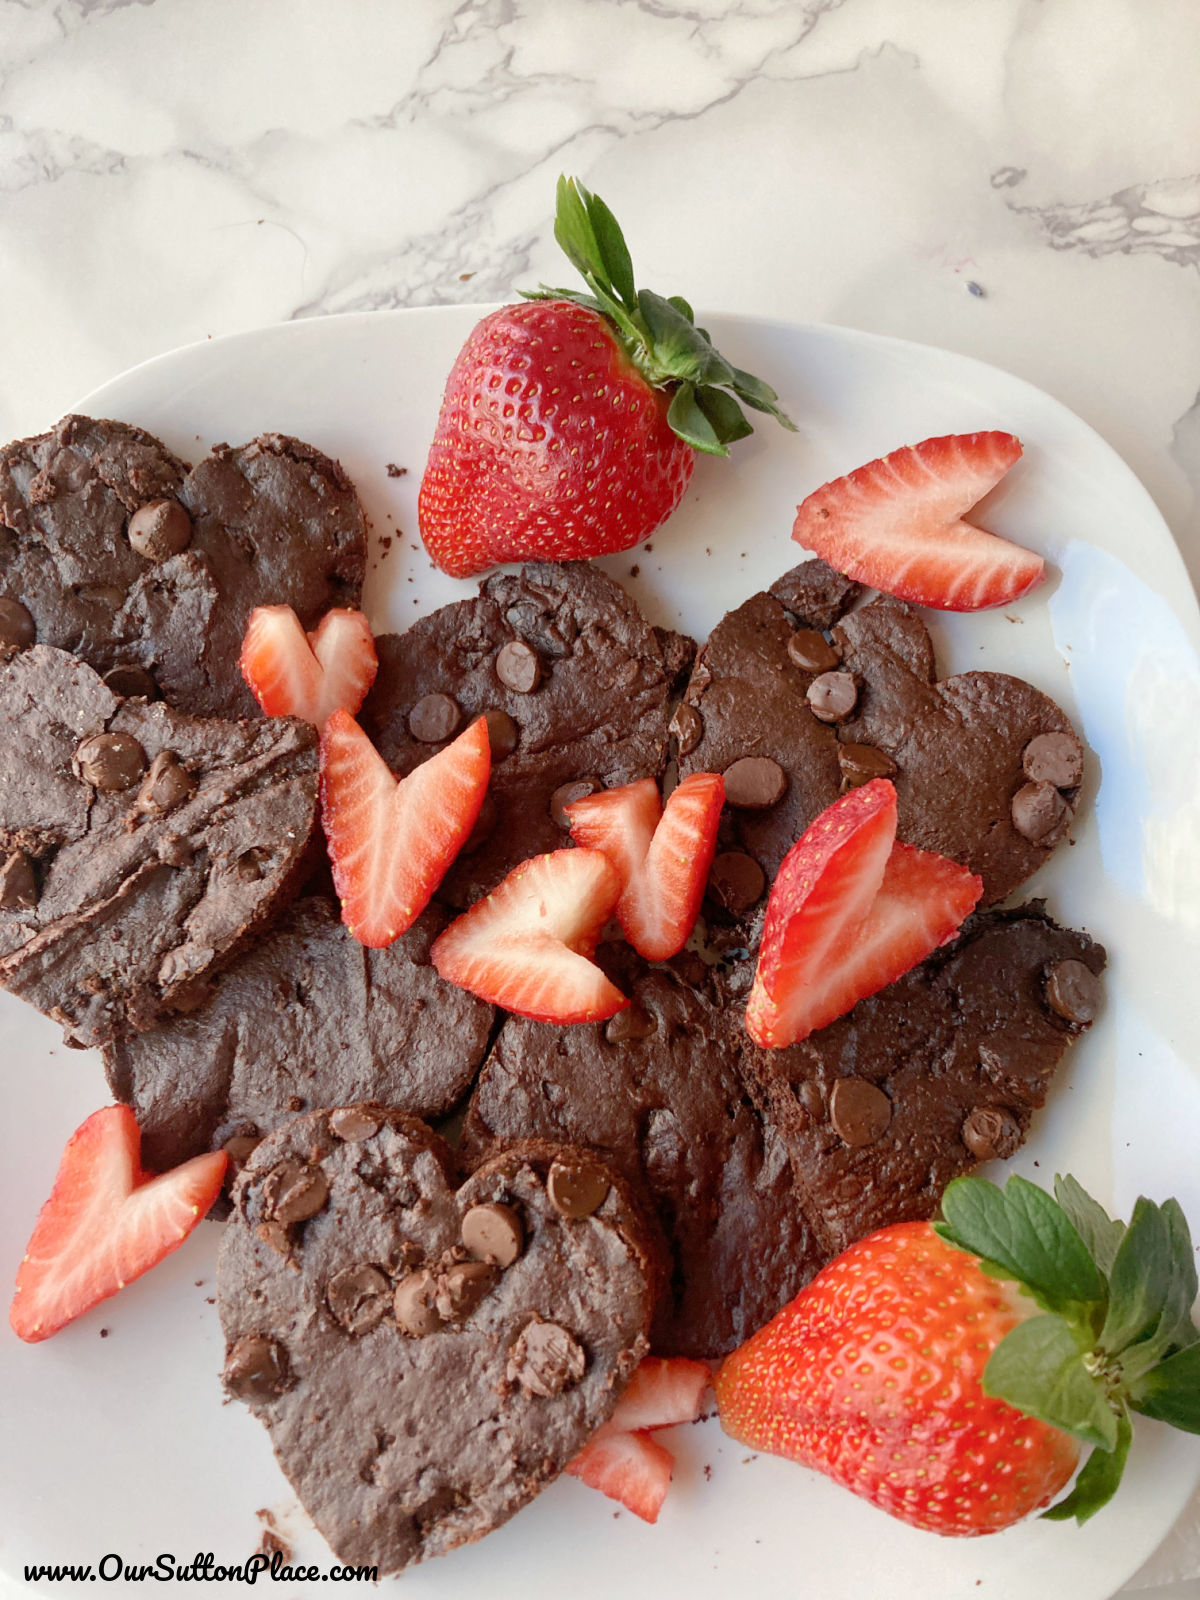 plate of heart-shaped brownie cookies with strawberries as garnish